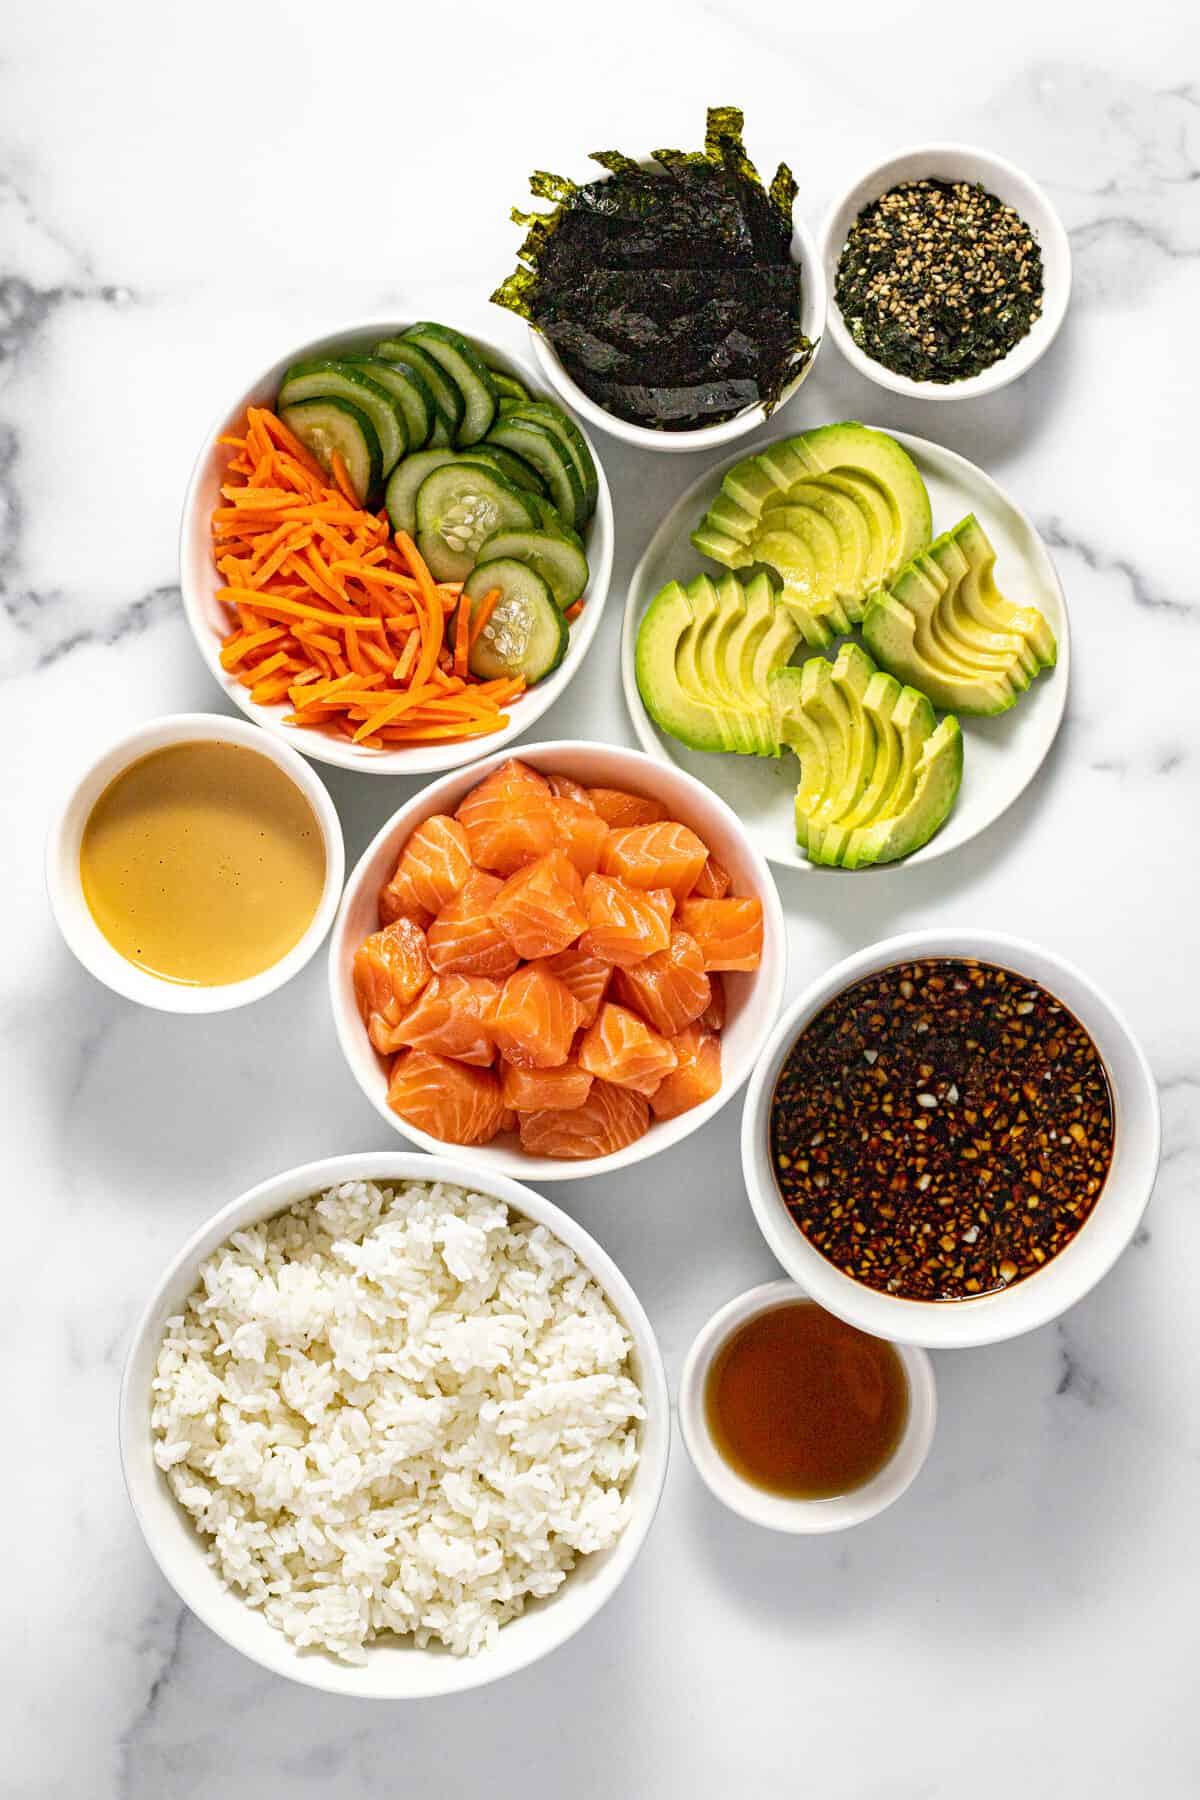 White marble countertop with bowls of ingredients to make a salmon sushi bowl